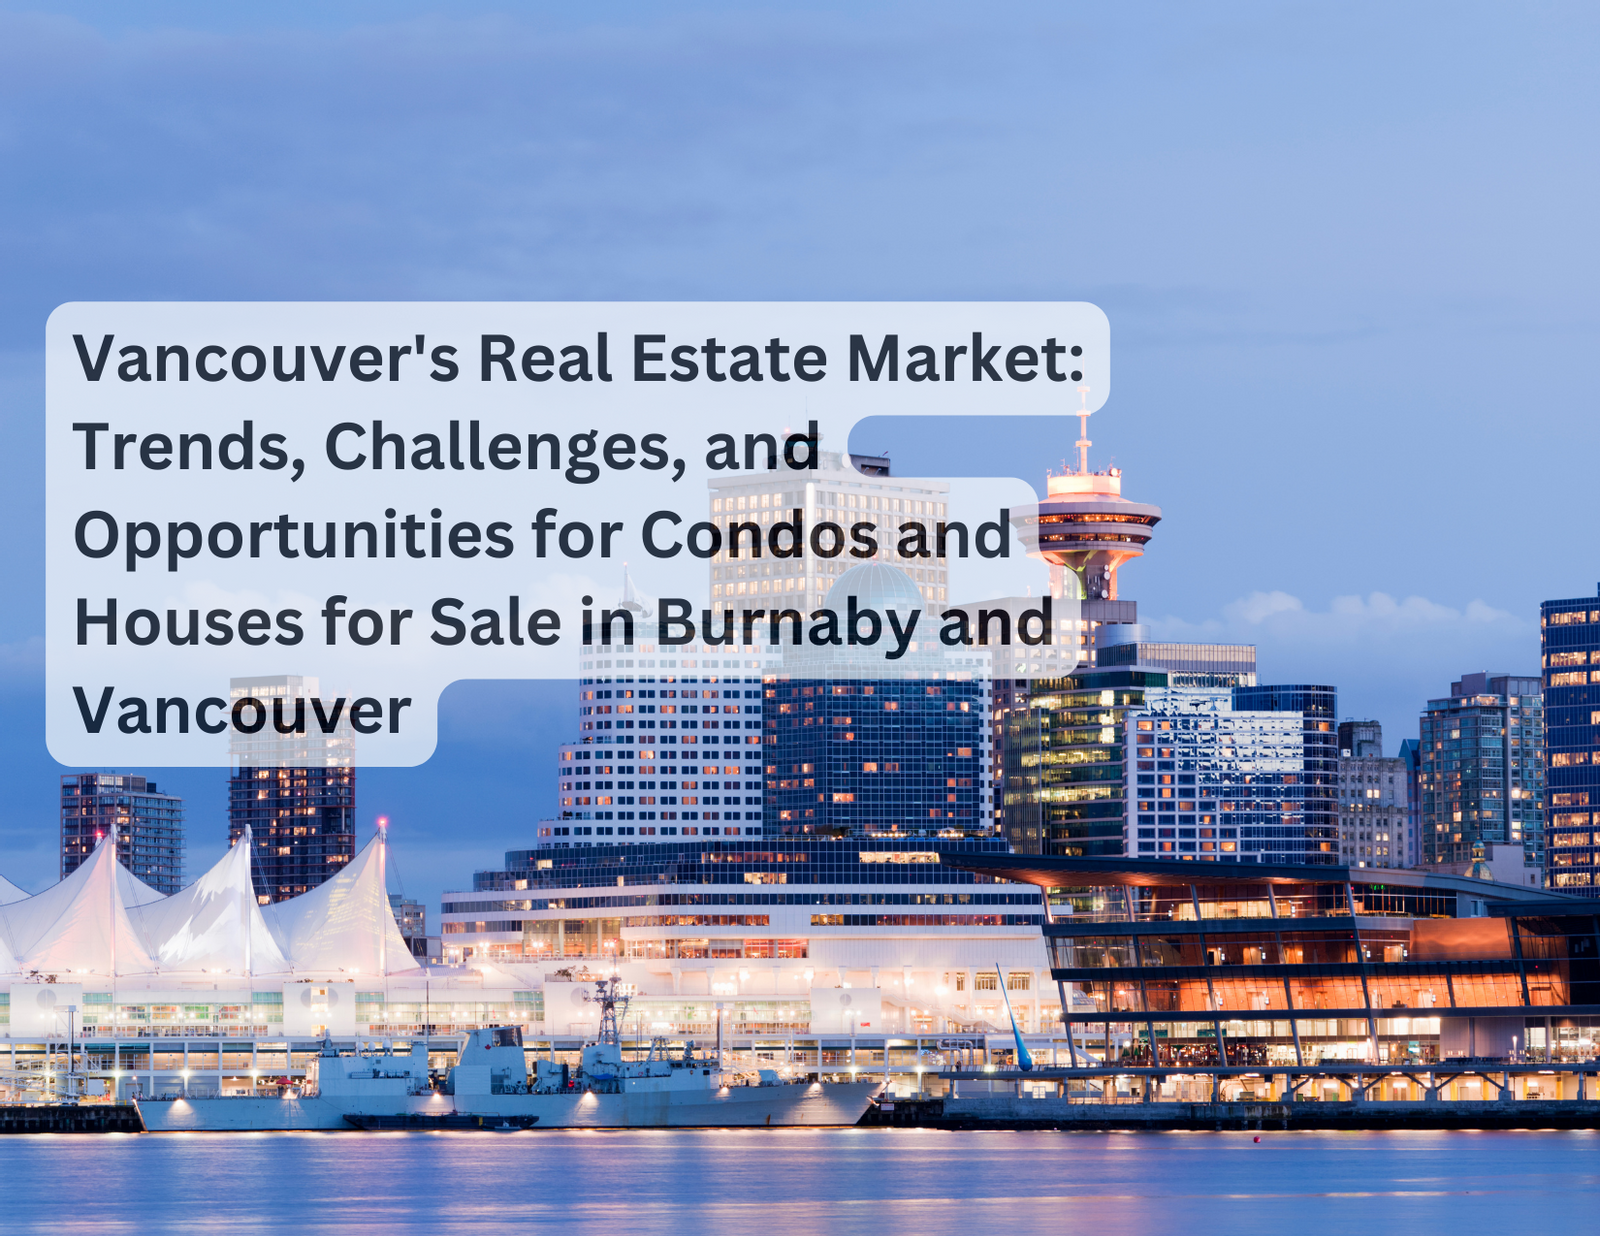 Vancouver's Real Estate Market: Trends, Challenges, and Opportunities for Condos and Houses for Sale in Burnaby and Vancouver